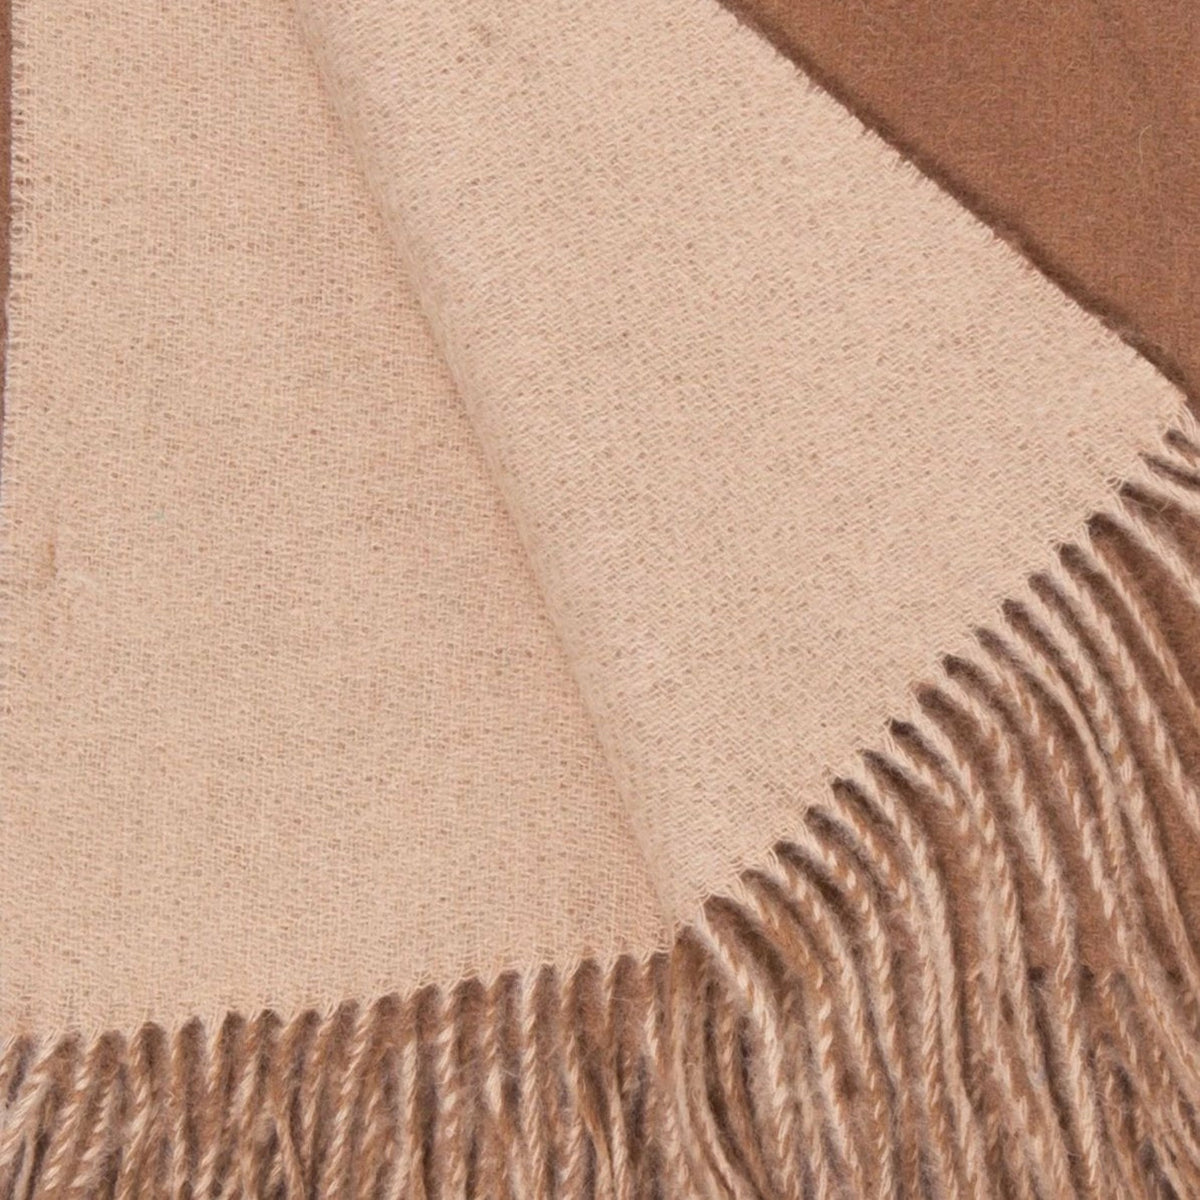 Alashan 100% Cashmere Double Faced Essential Throw Swatch Camel/Apricot Fine Linens